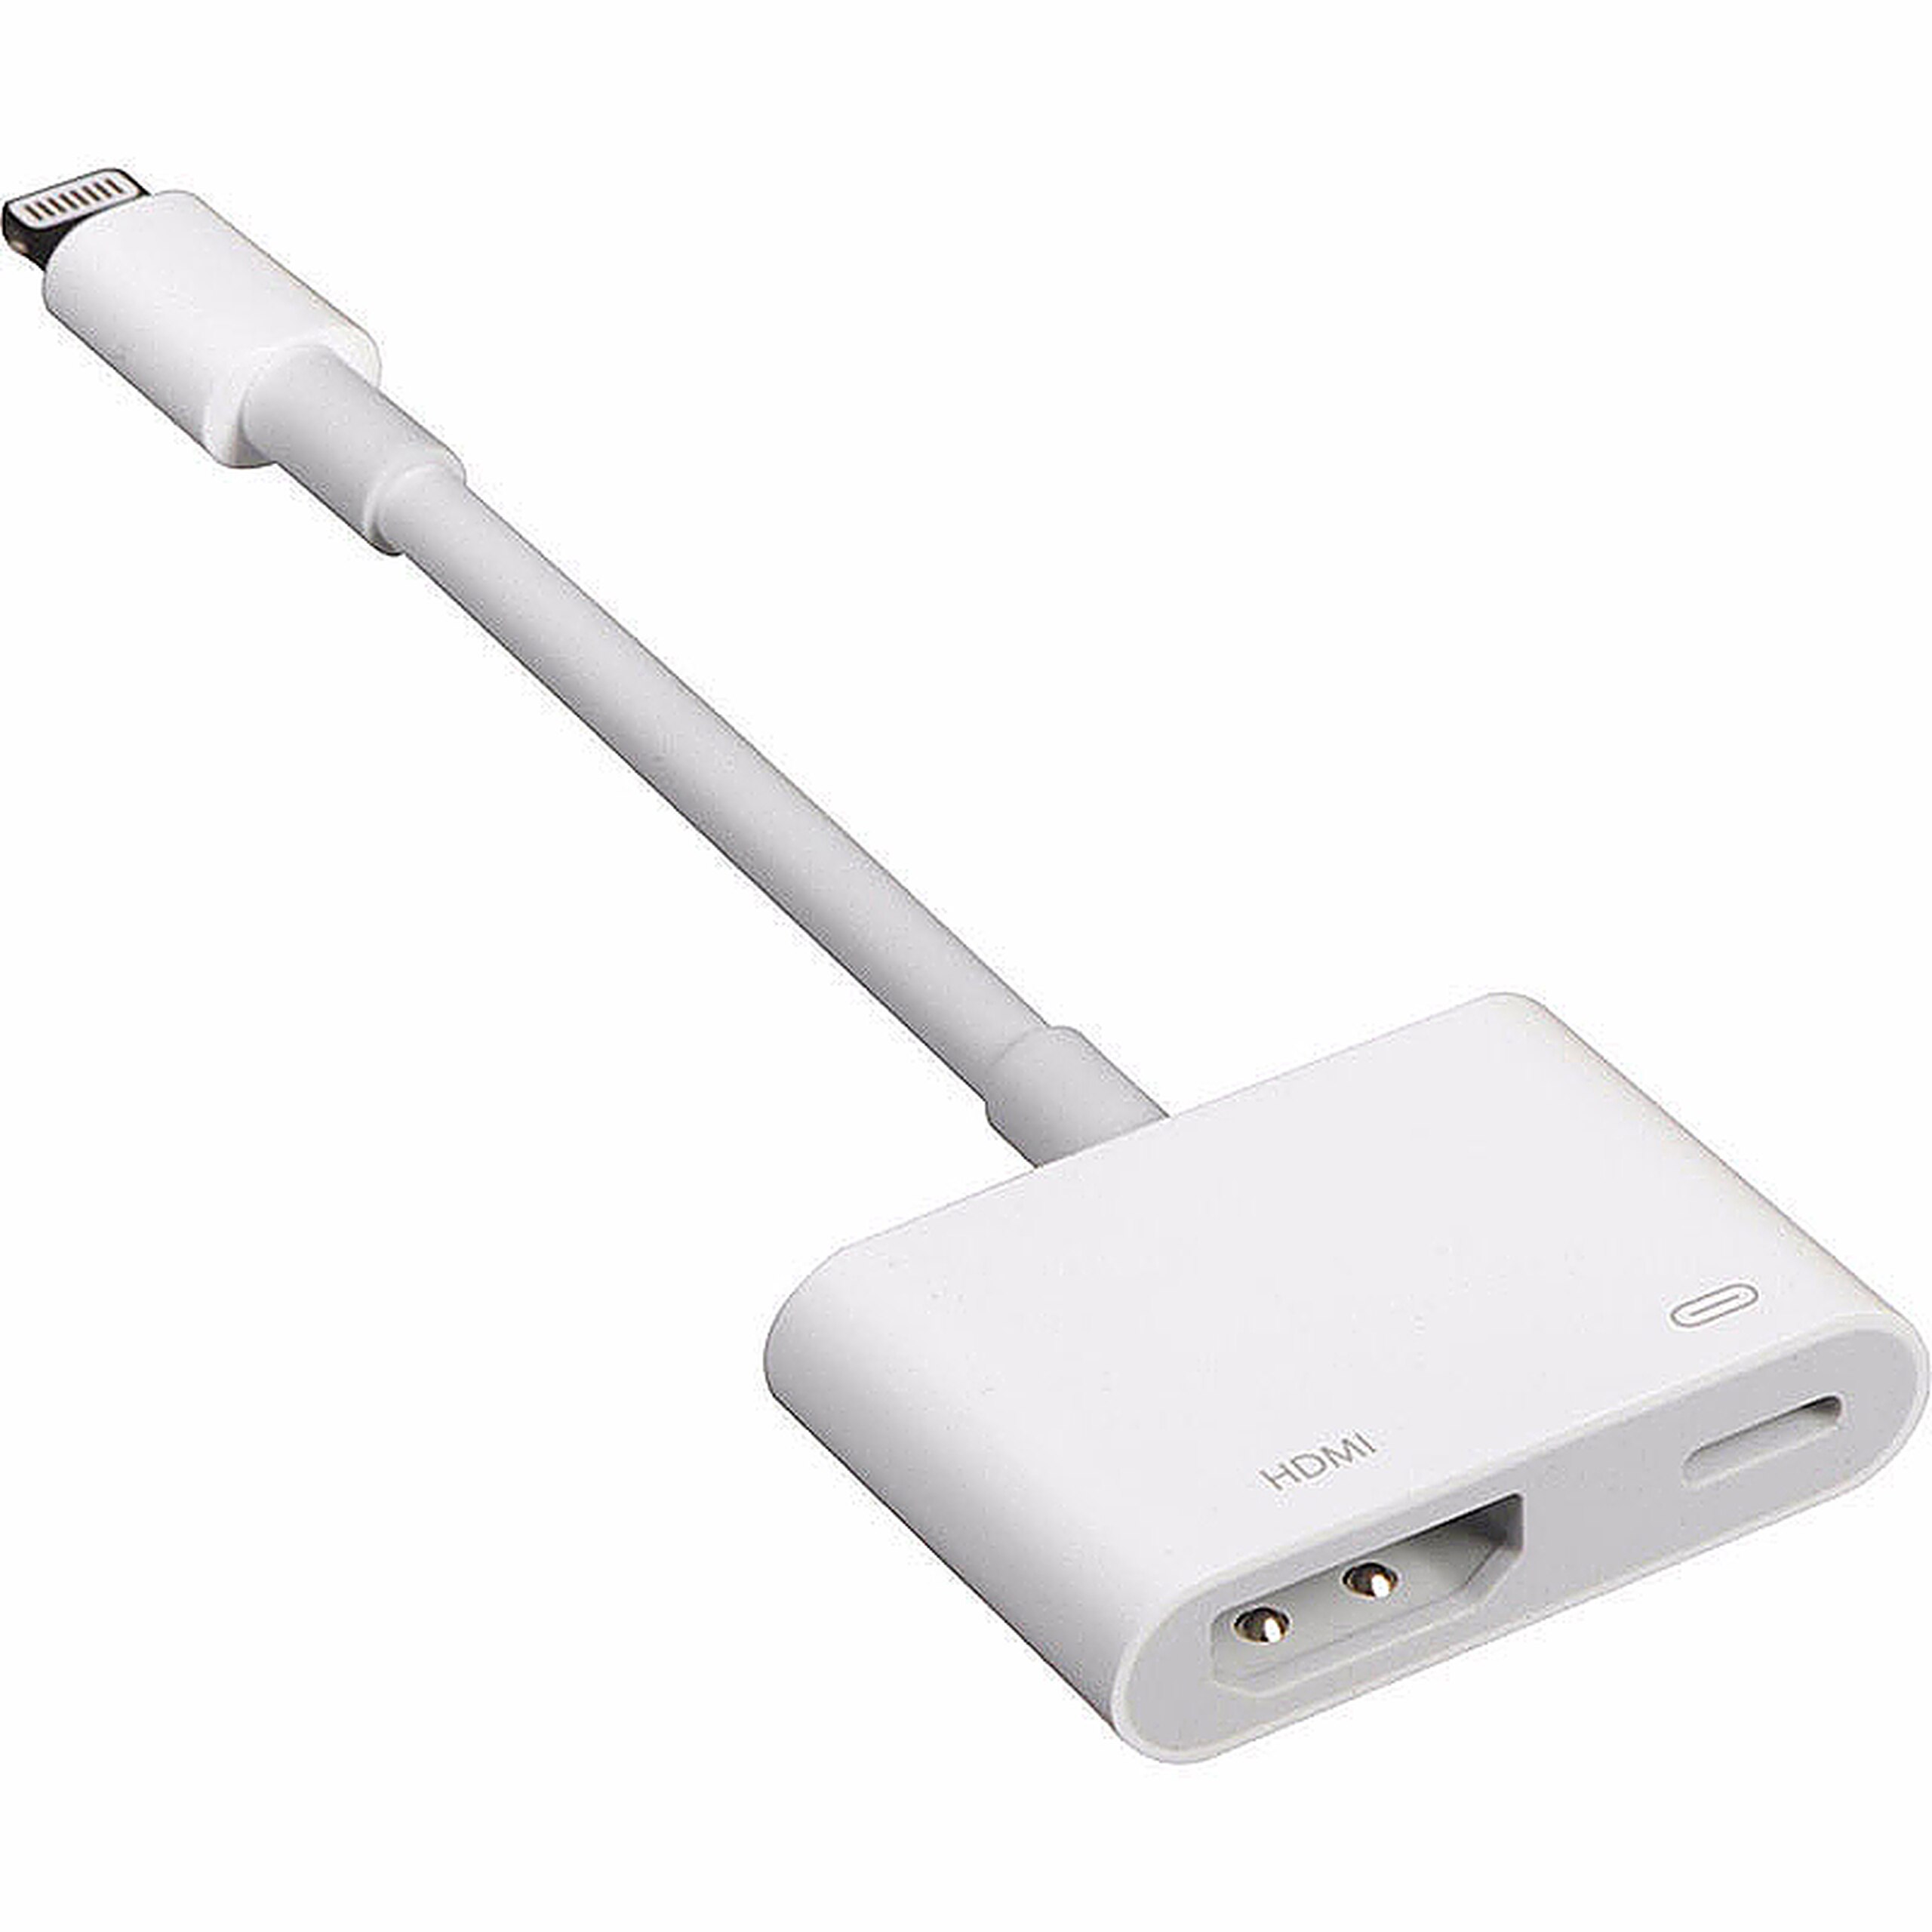 For Apple iPhone 13 12 11 X Pro Max iPad Lightning To HDMI Digital AV TV  Cable Adapter (Latest Model No Power required Plug&Play)